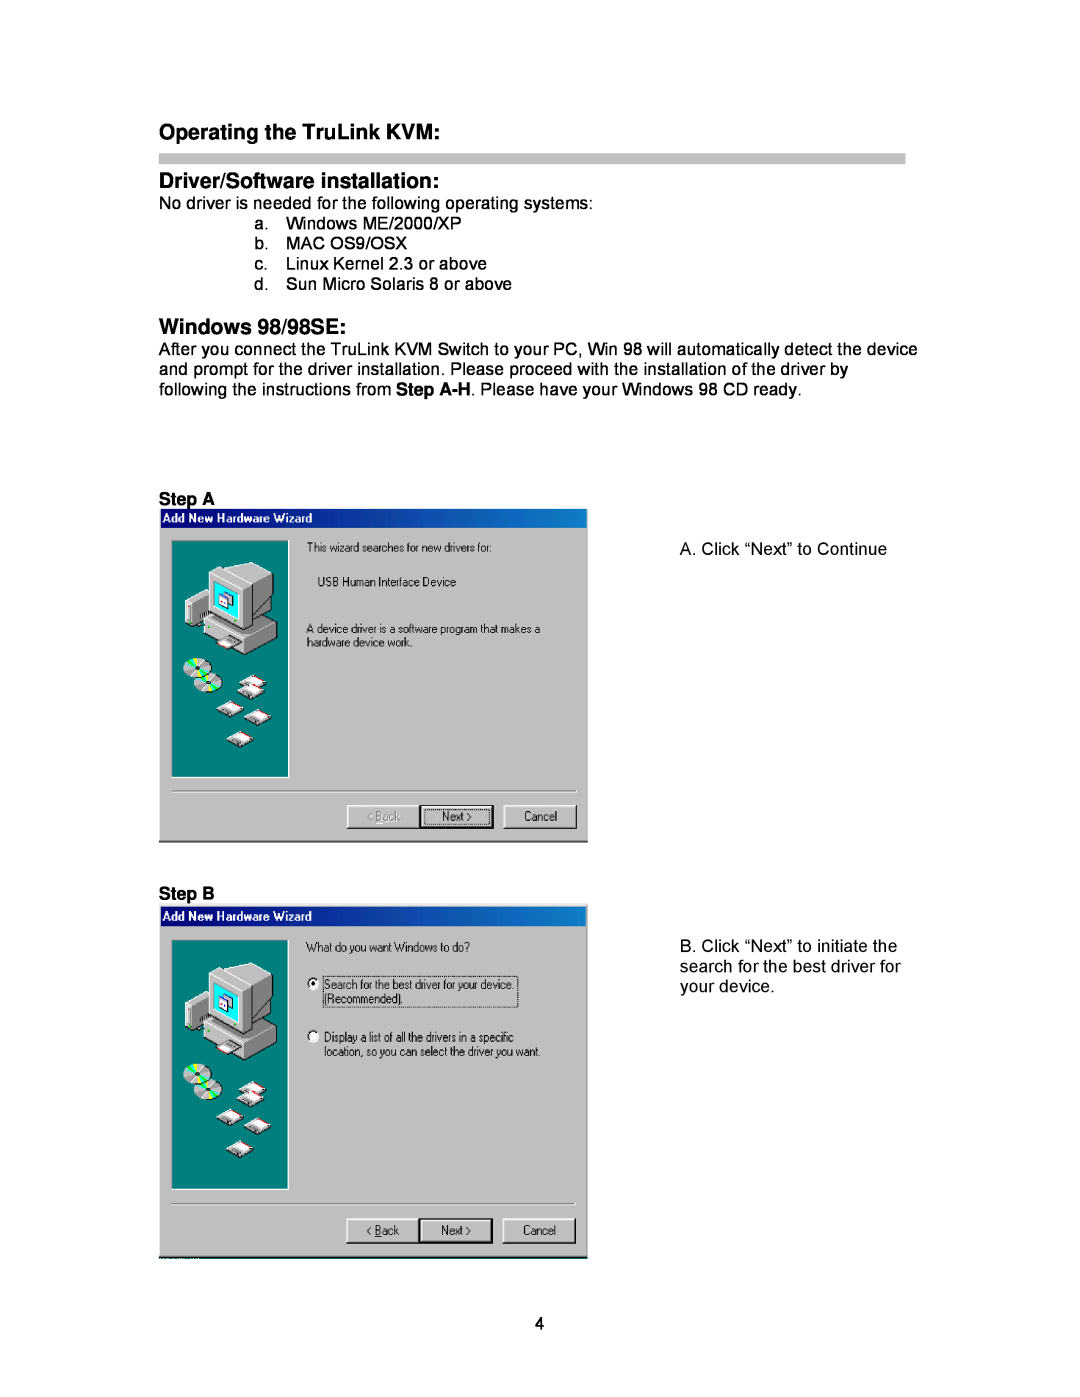 Cables to Go 35554 operation manual Operating the TruLink KVM Driver/Software installation, Windows 98/98SE, Step A, Step B 